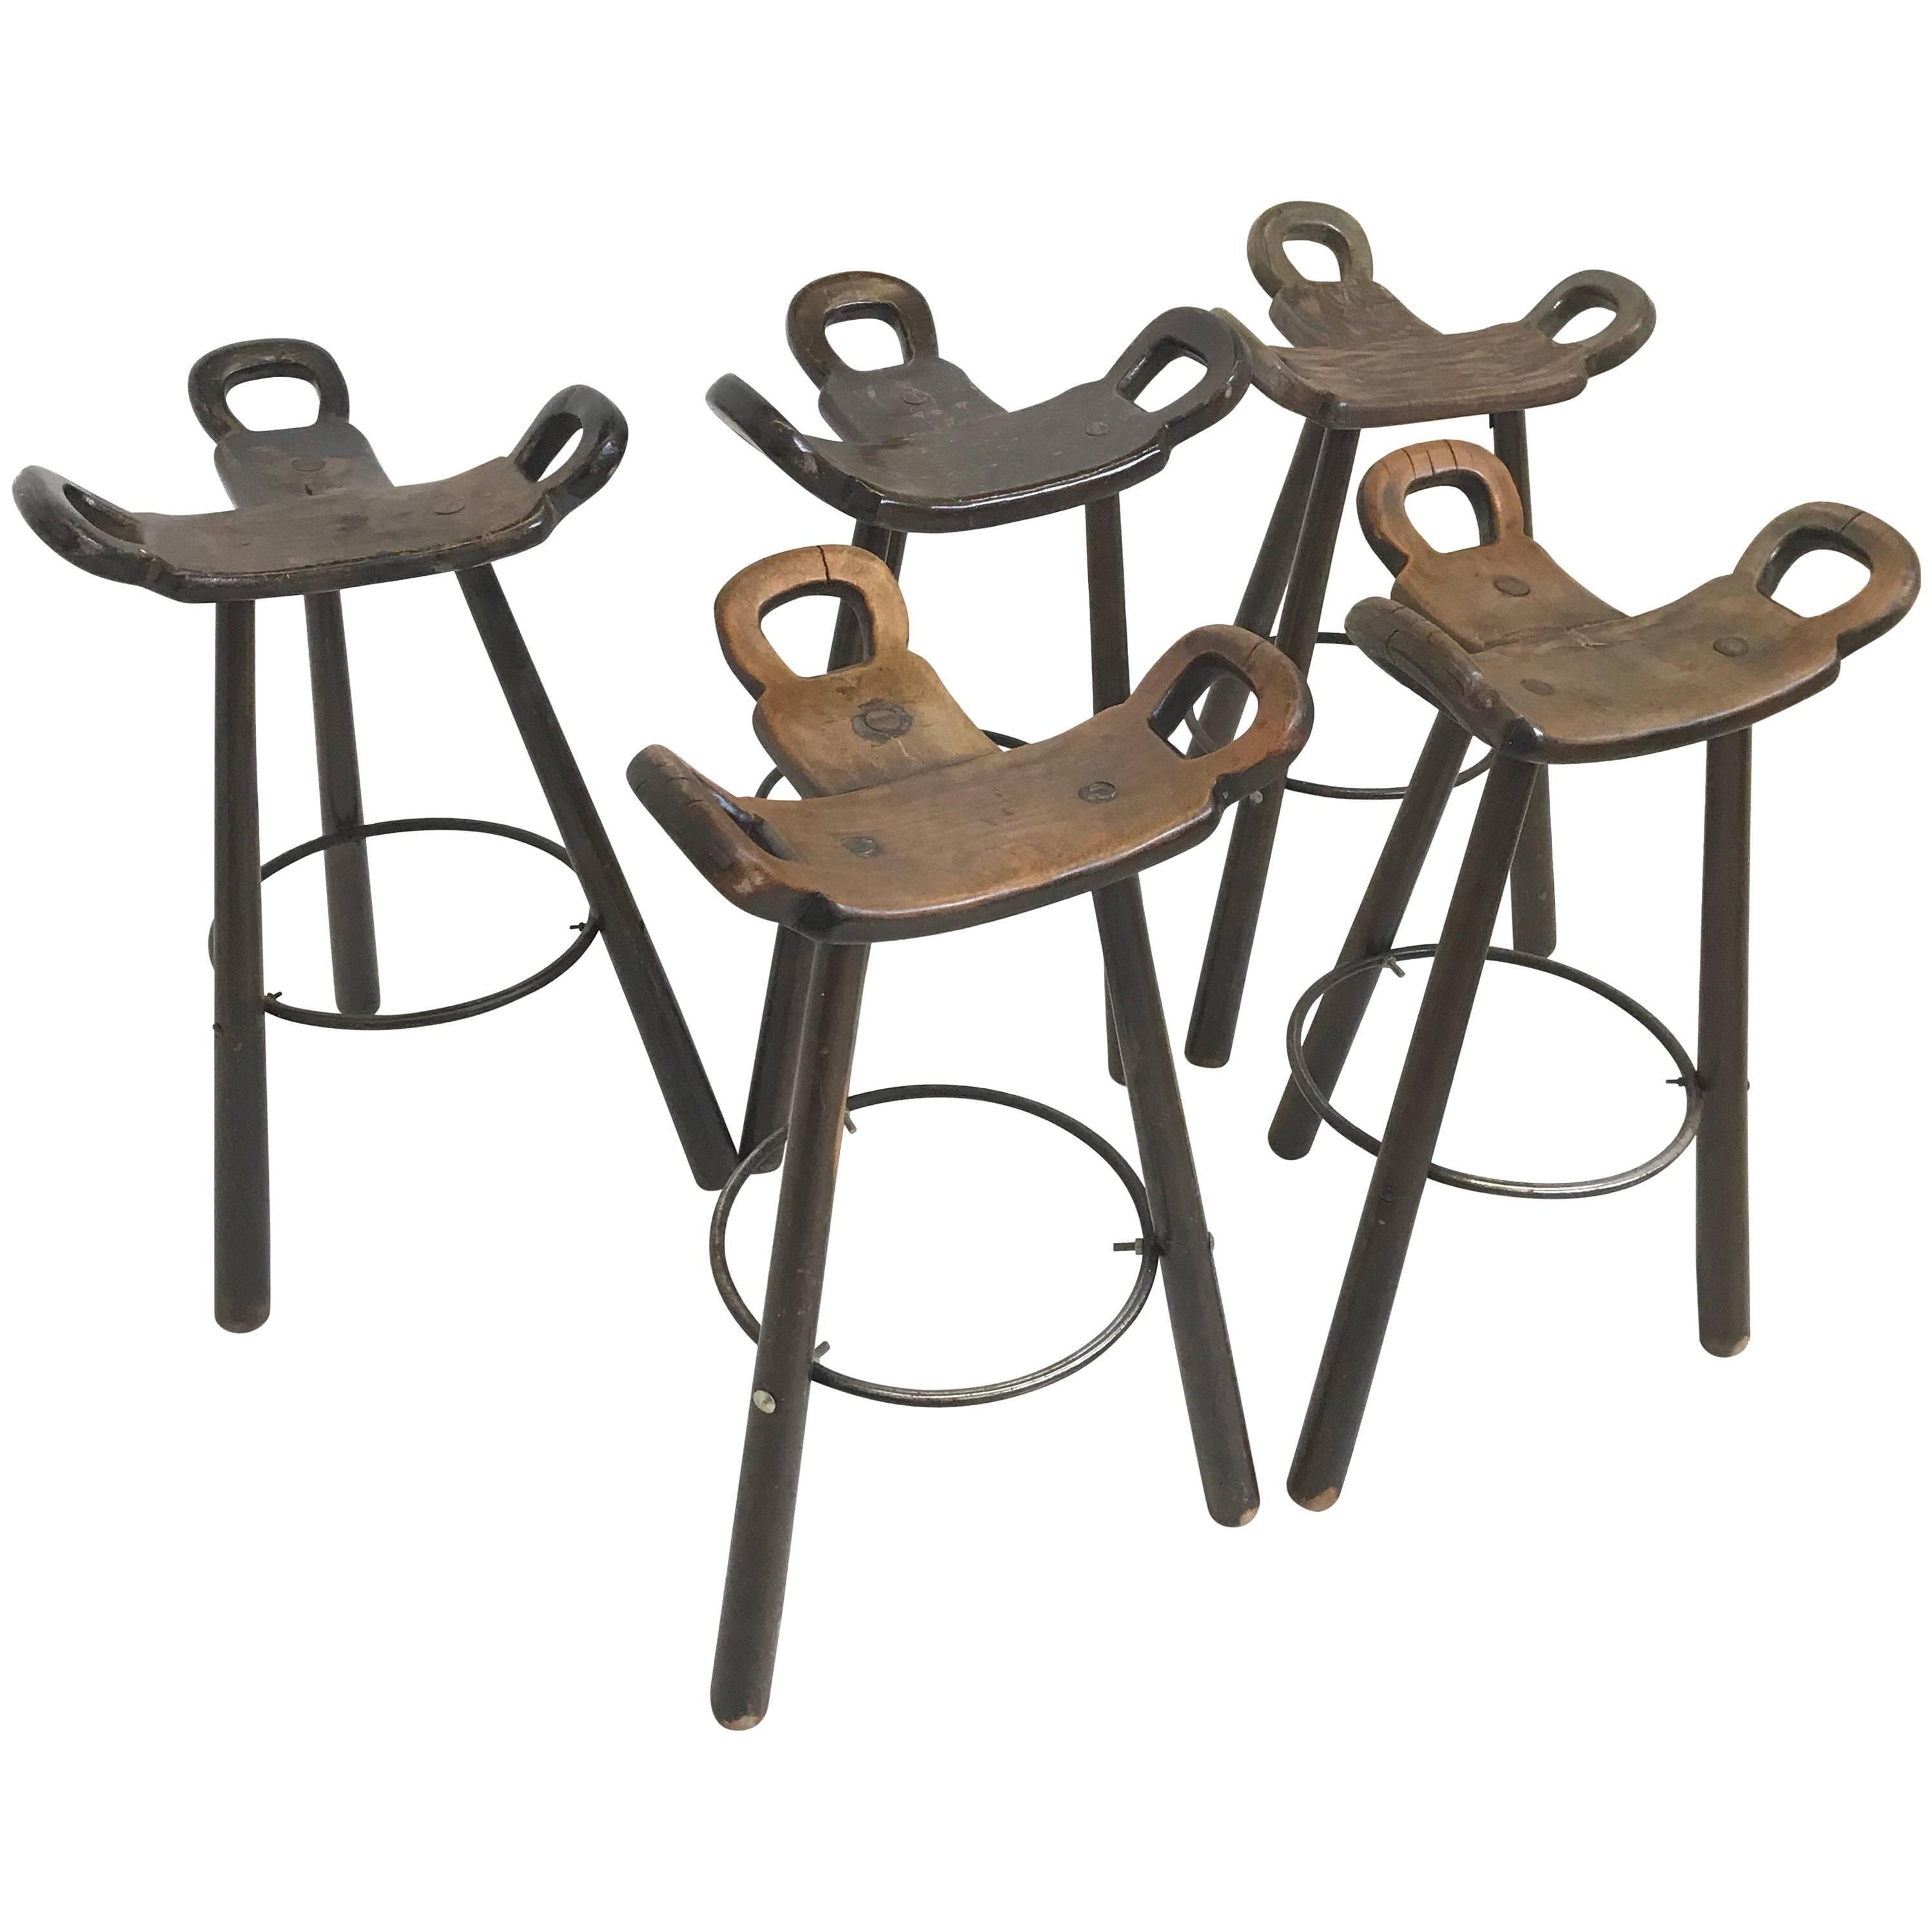 Brutalist Barstool Spanish Chair Marbella Set of Five For Sale